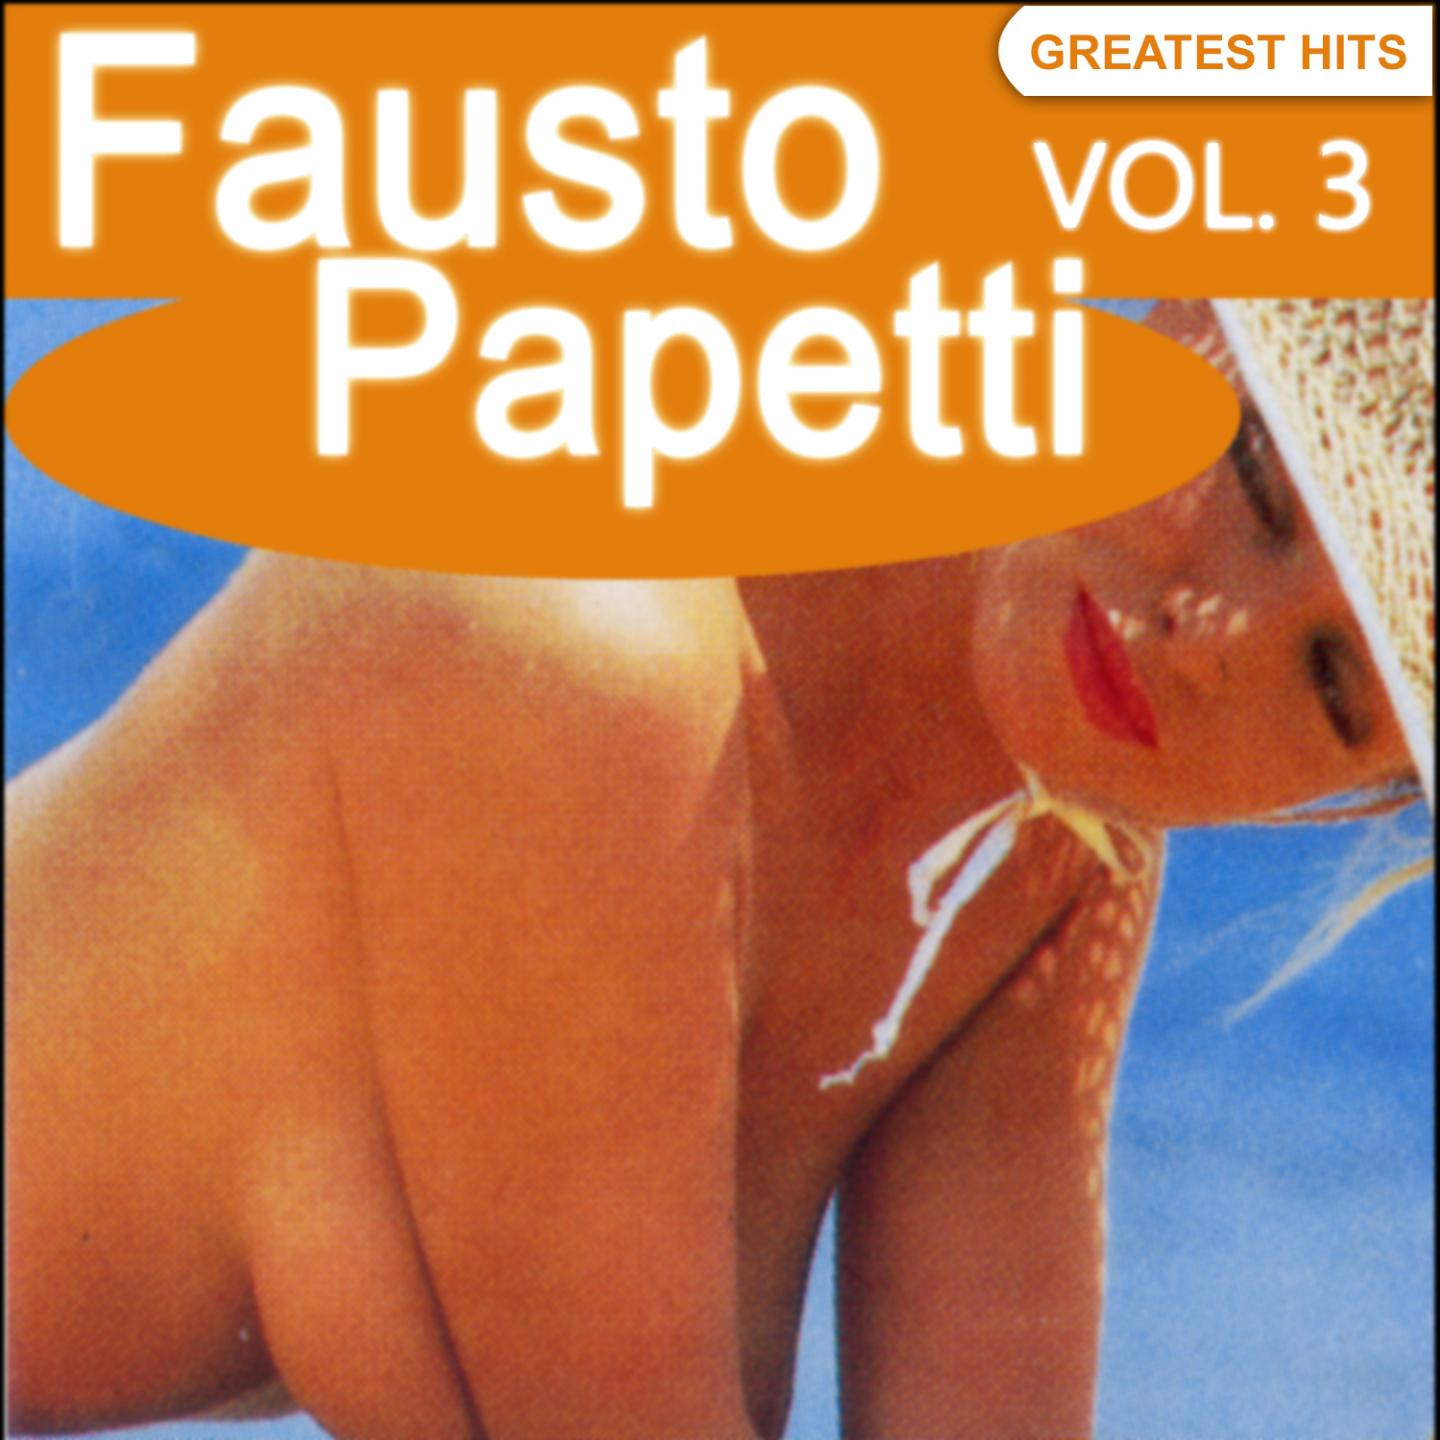 Fausto Papetti Greatest Hits, Vol. 3 (Remastered)专辑